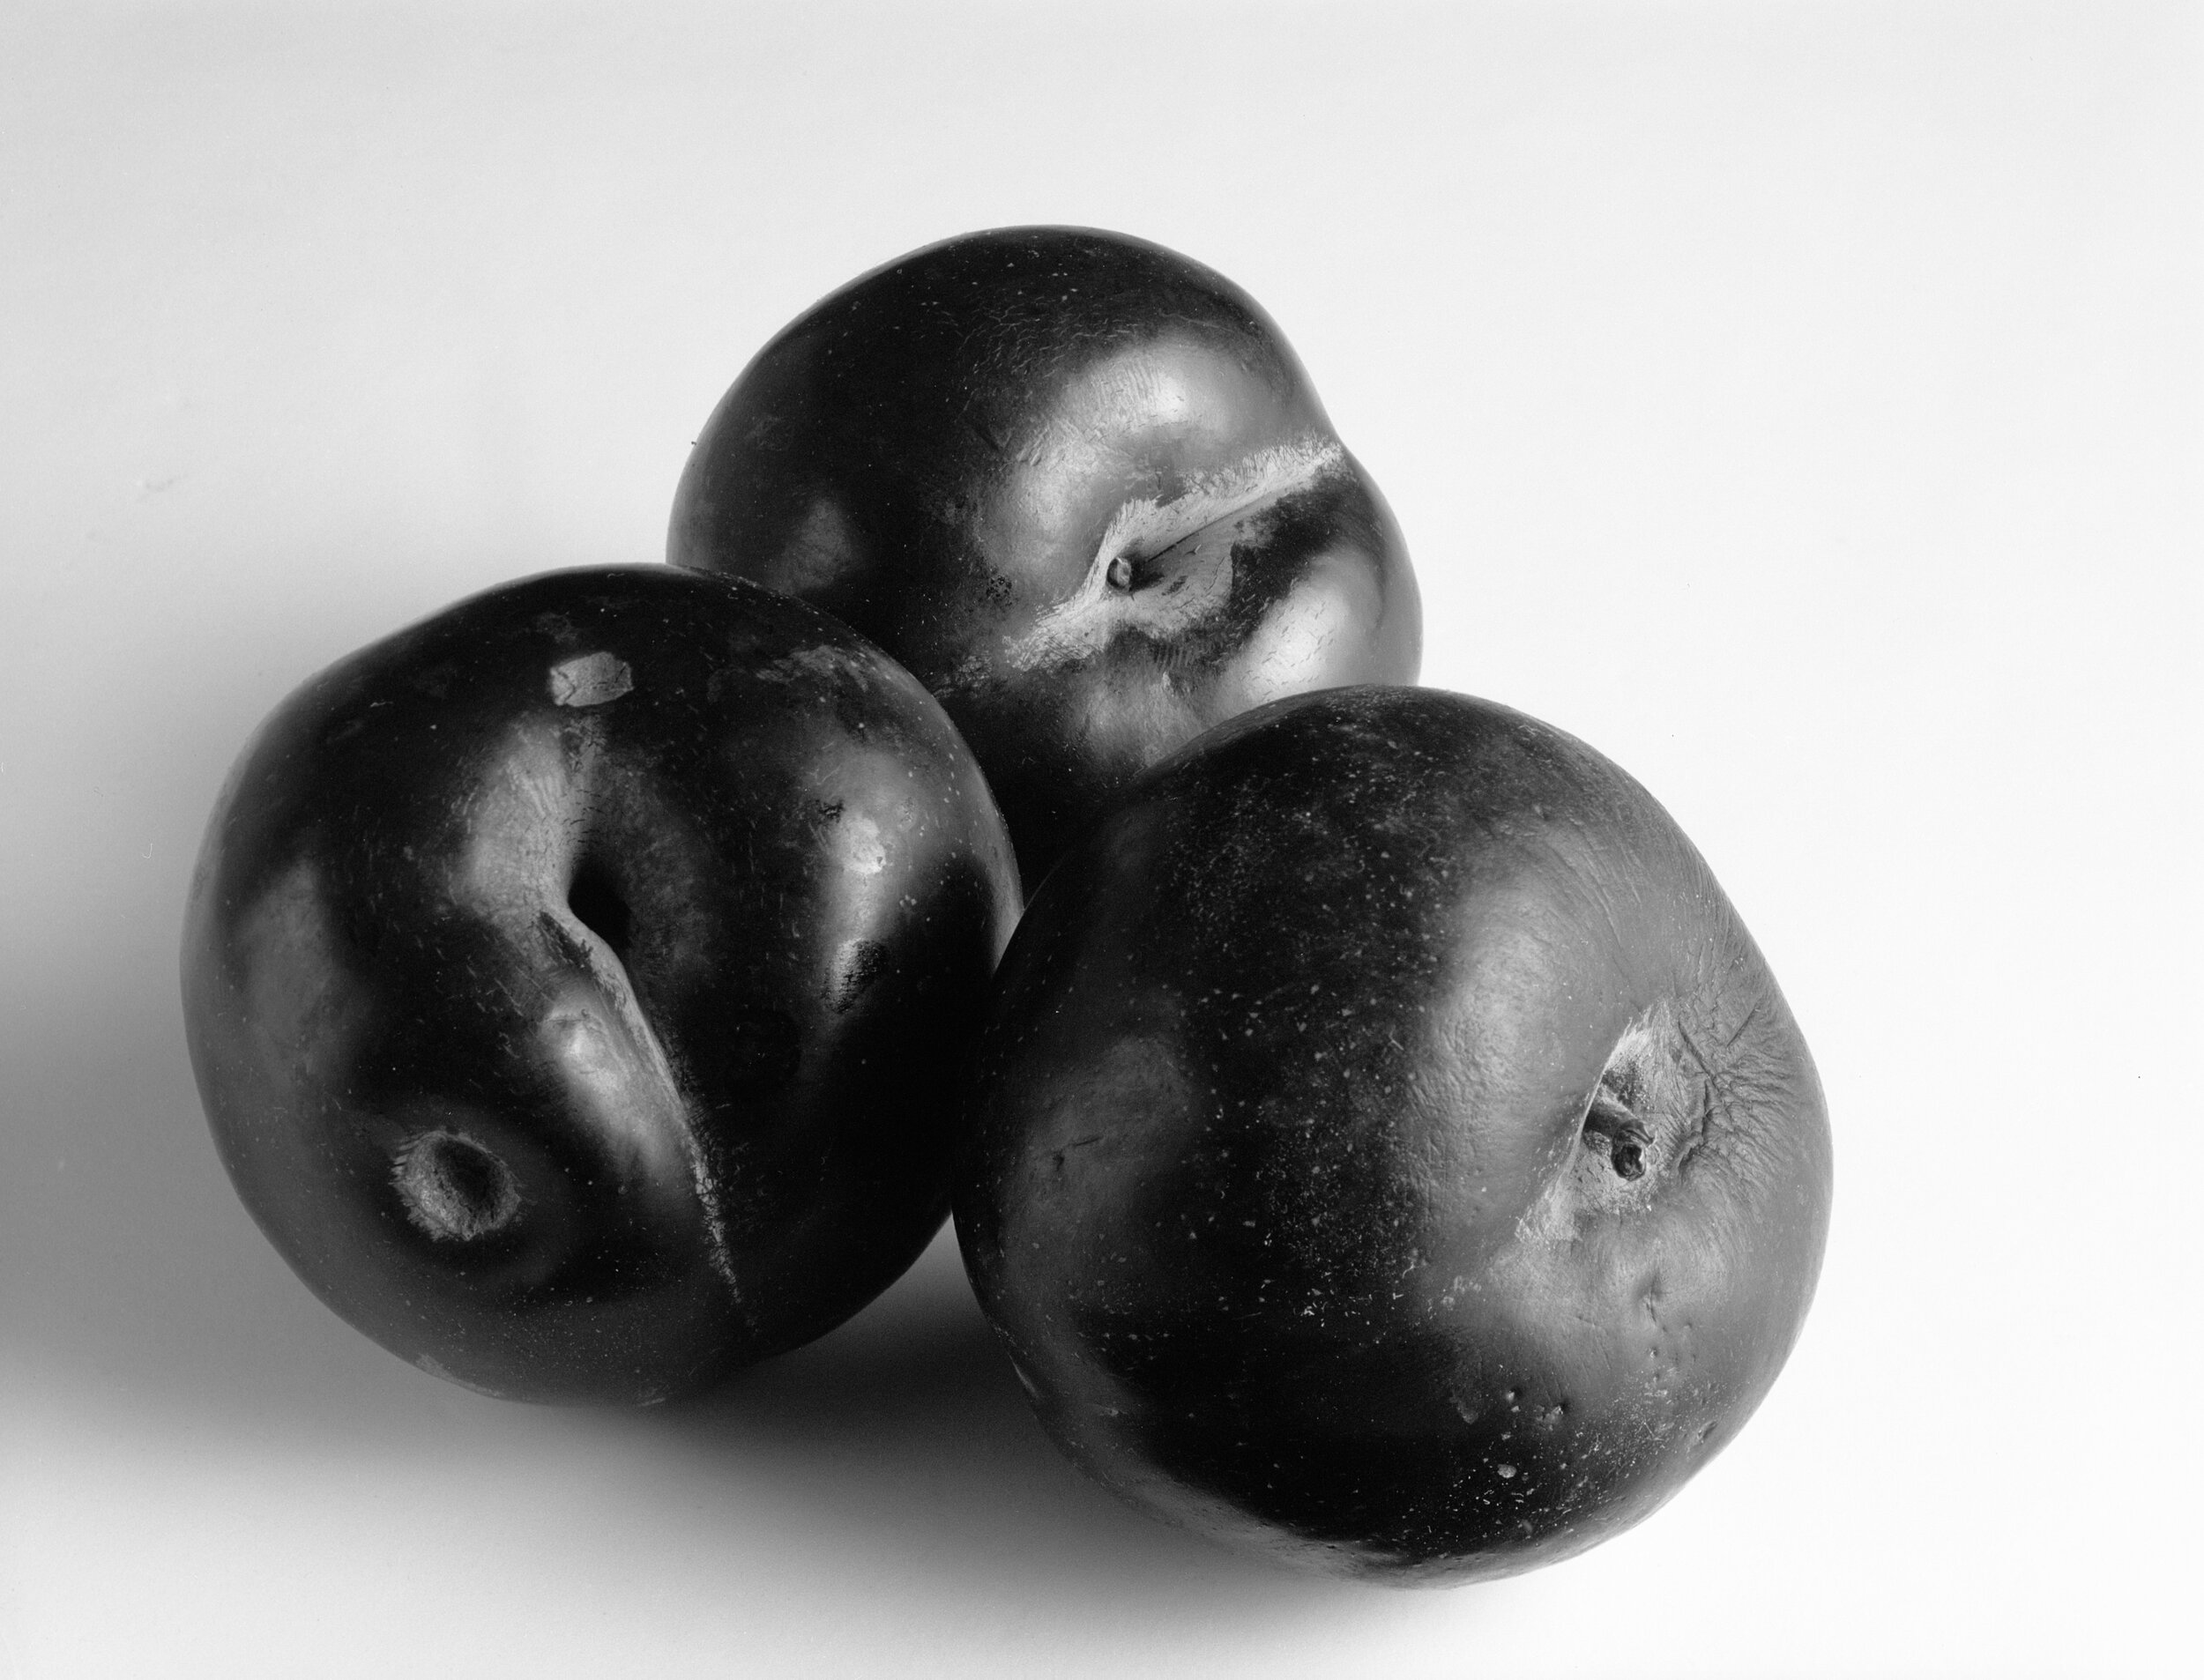 Plums Still Life (date unknown)